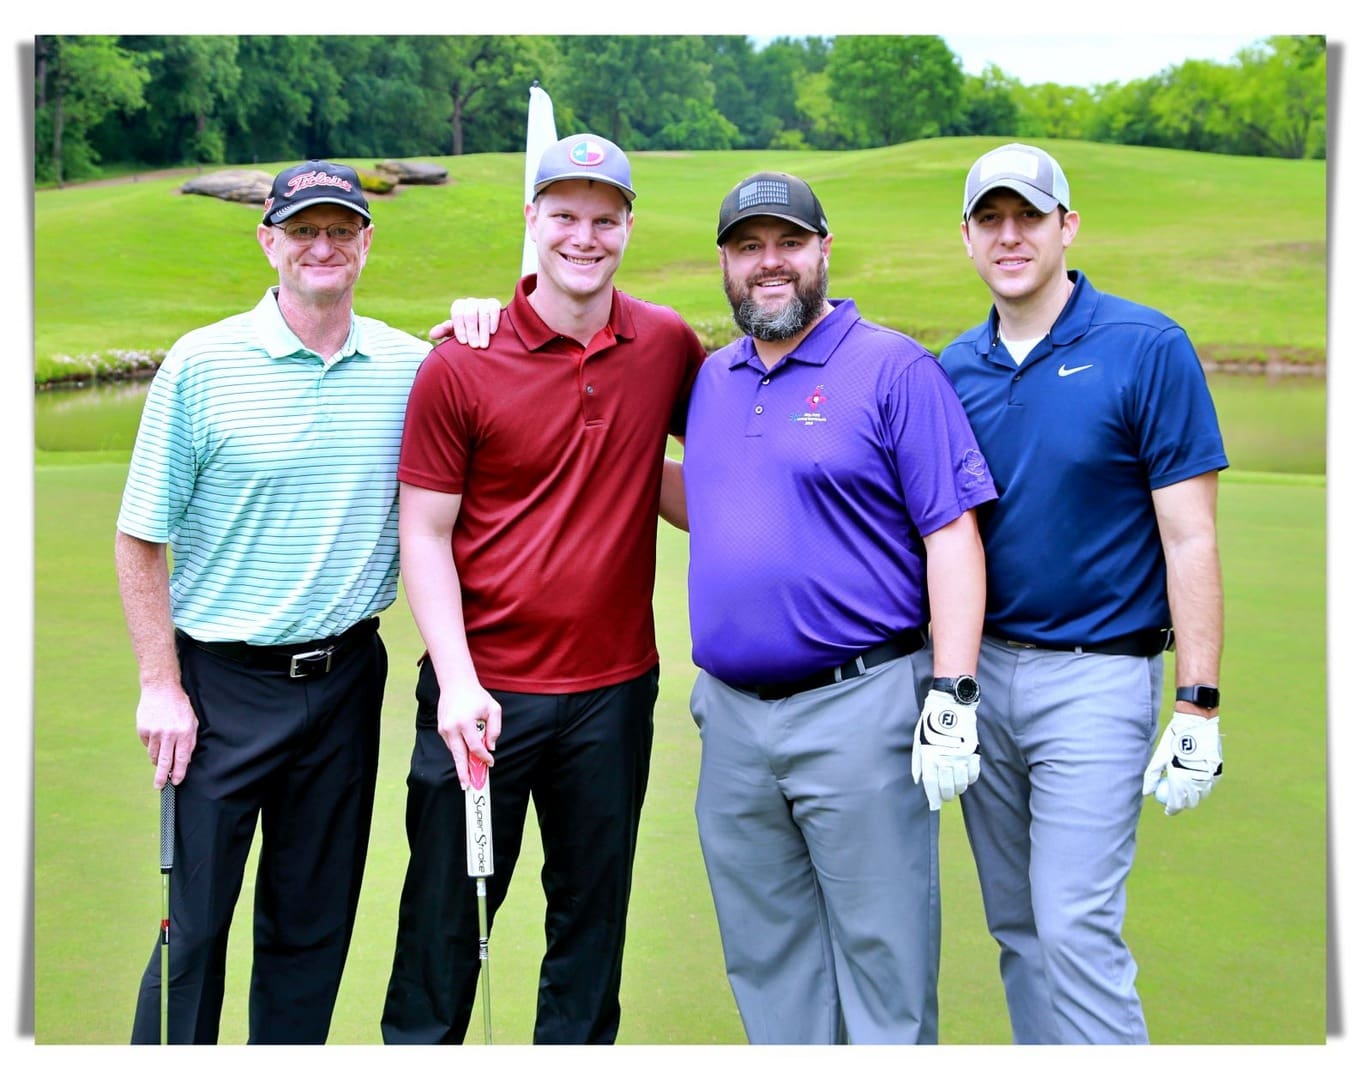 Four men posing for a photo on a golf course.